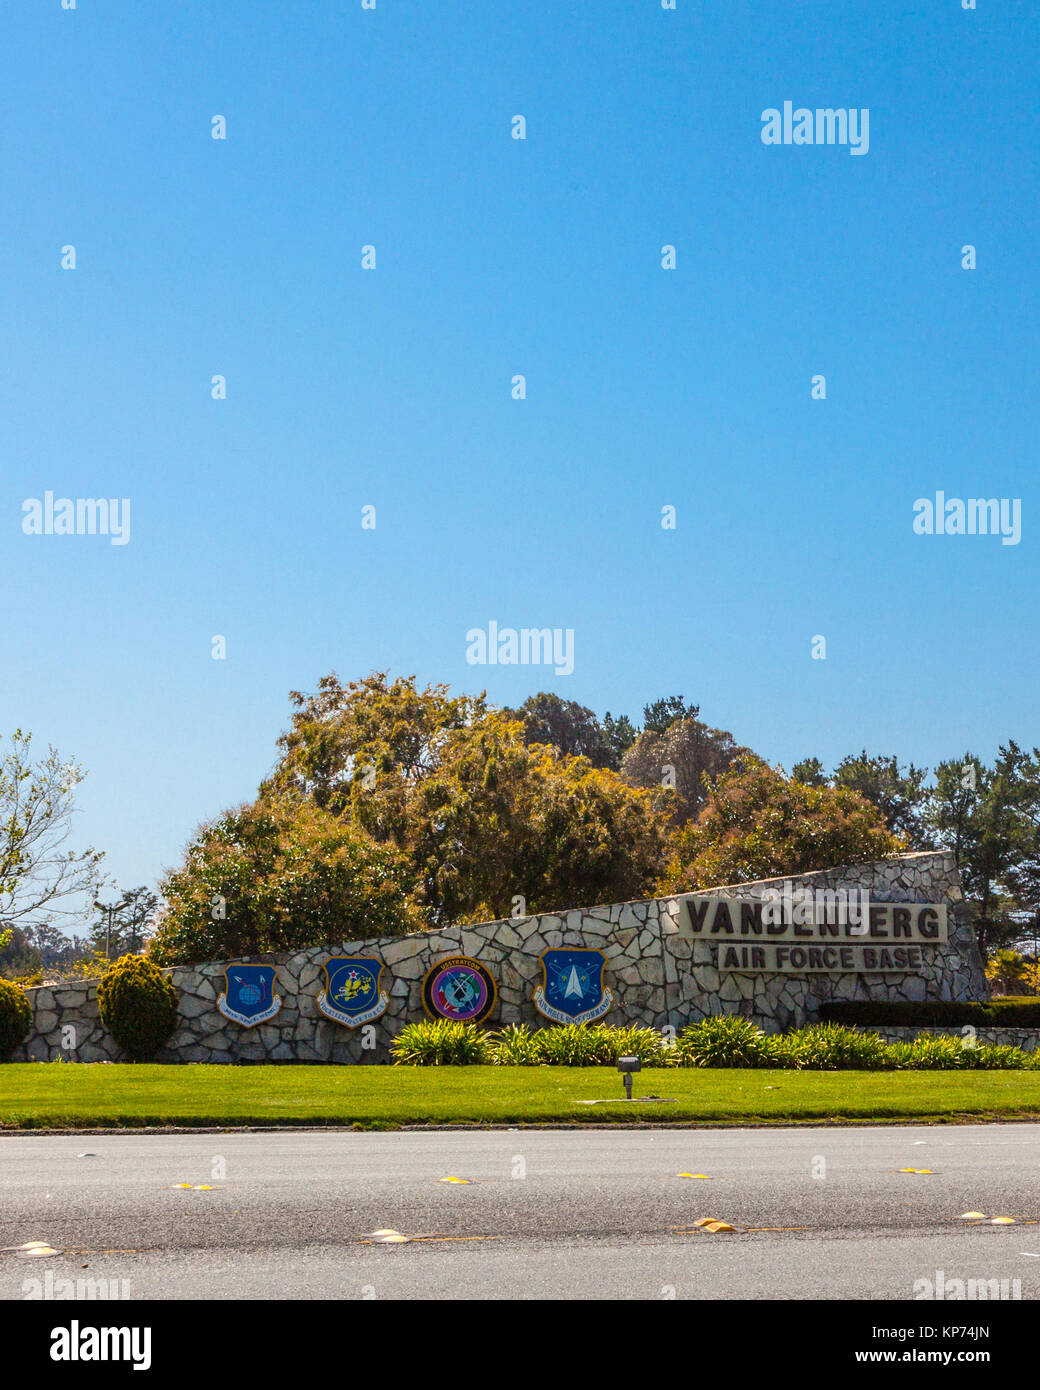 The entrance to Vandenberg Air Force base in Lompoc California 30th Space wing Fourteenth Air Force US Stratcom Air Force Space Stock Photo